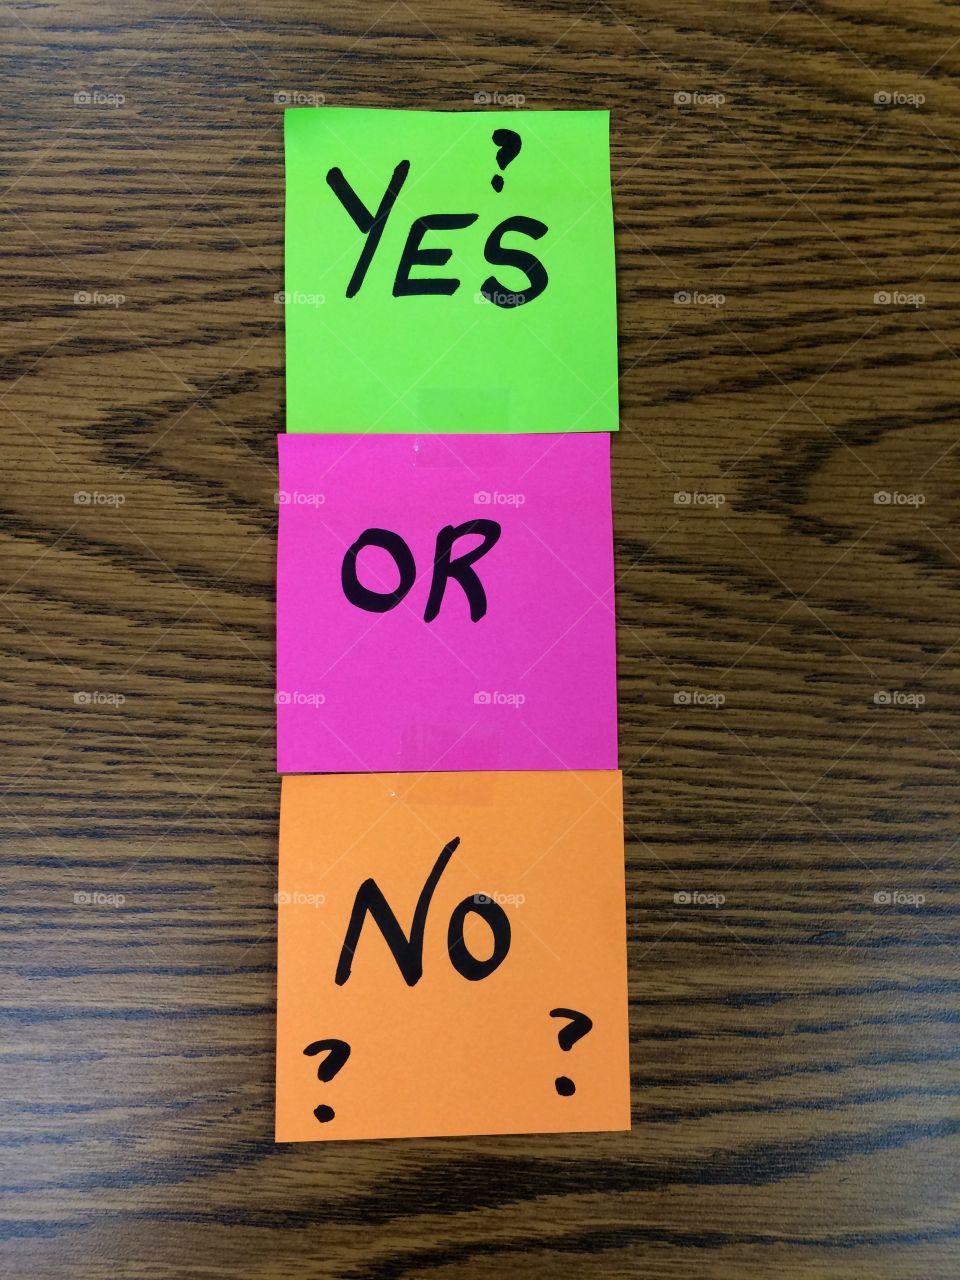 All decisions ultimately are decided by a yes or no answer.
